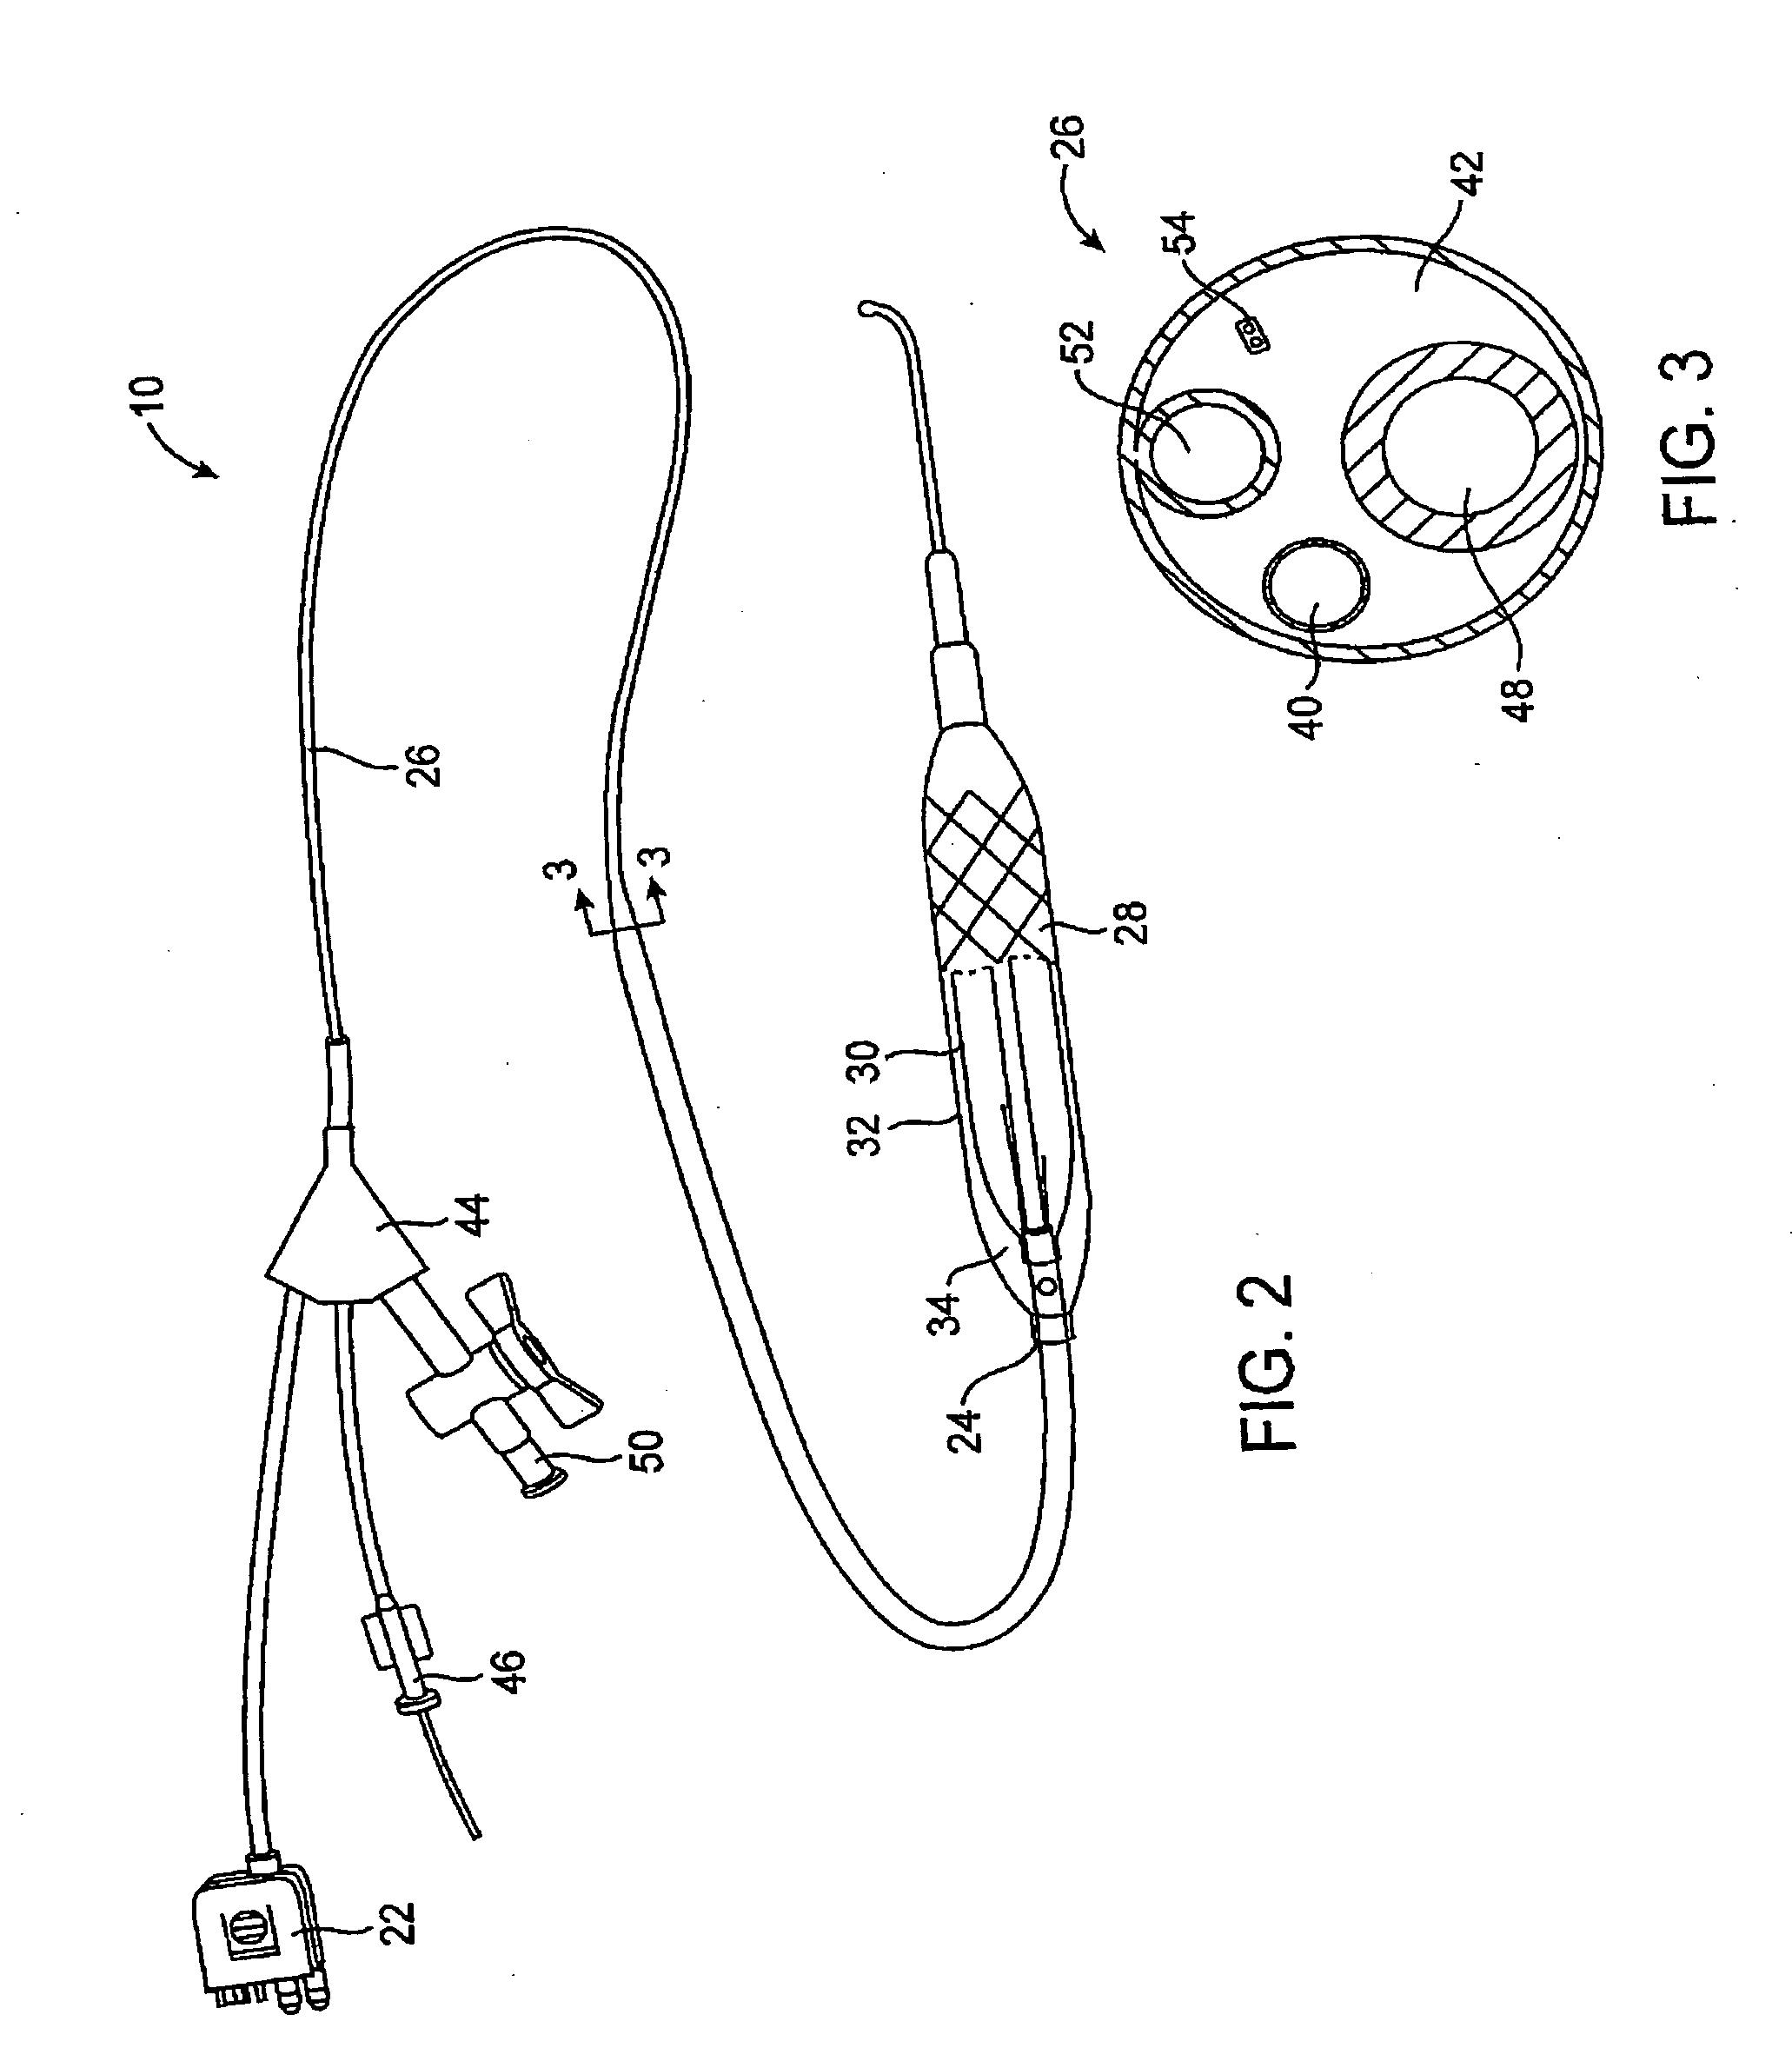 Efficient controlled cryogenic fluid delivery into a balloon catheter and other treatment devices